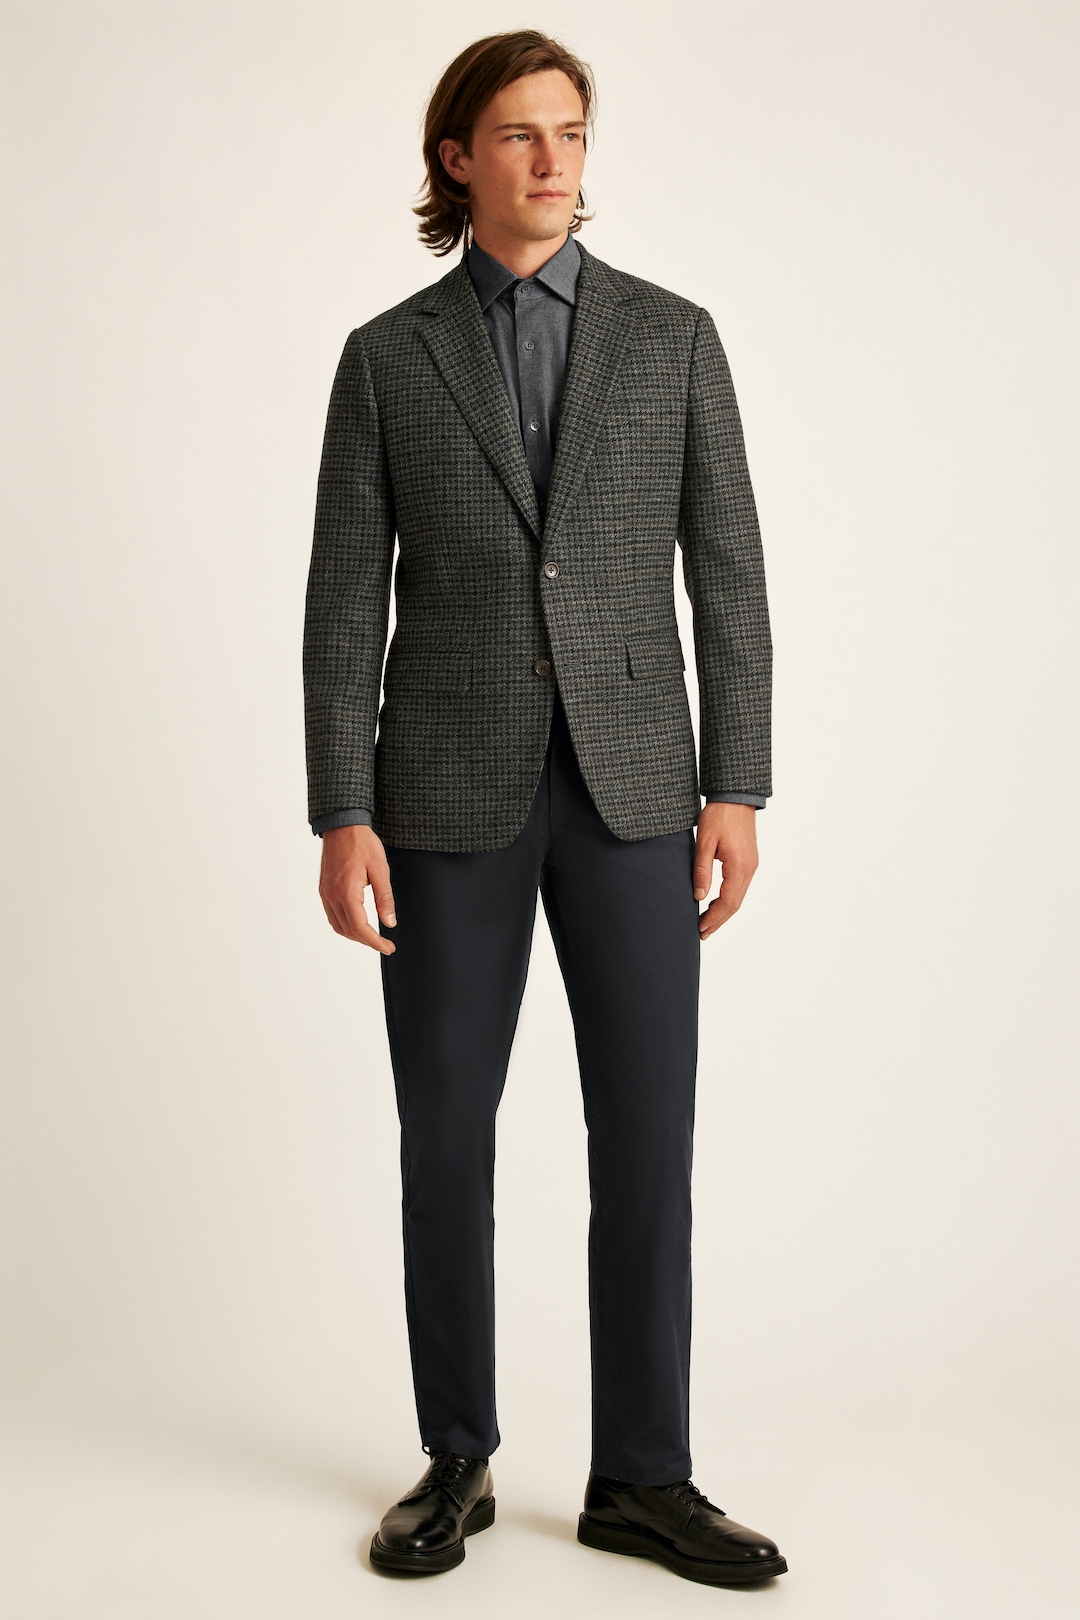 Charcoal houndstooth blazer, gray dress shirt, gray chinos, and black derby shoes outfit